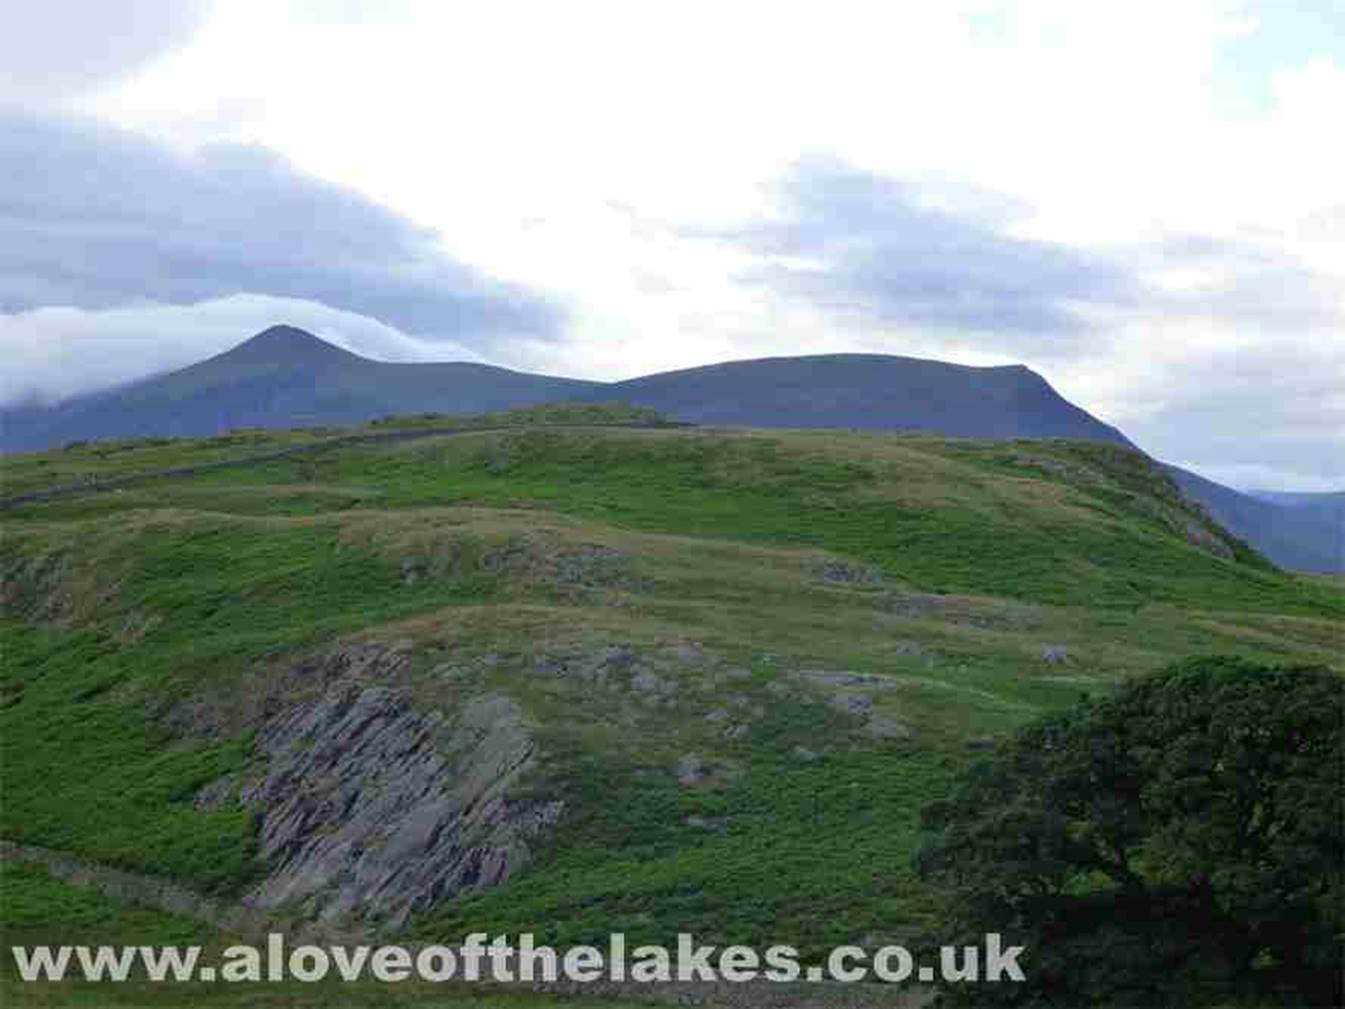 Looking North towards Skiddaw from the path